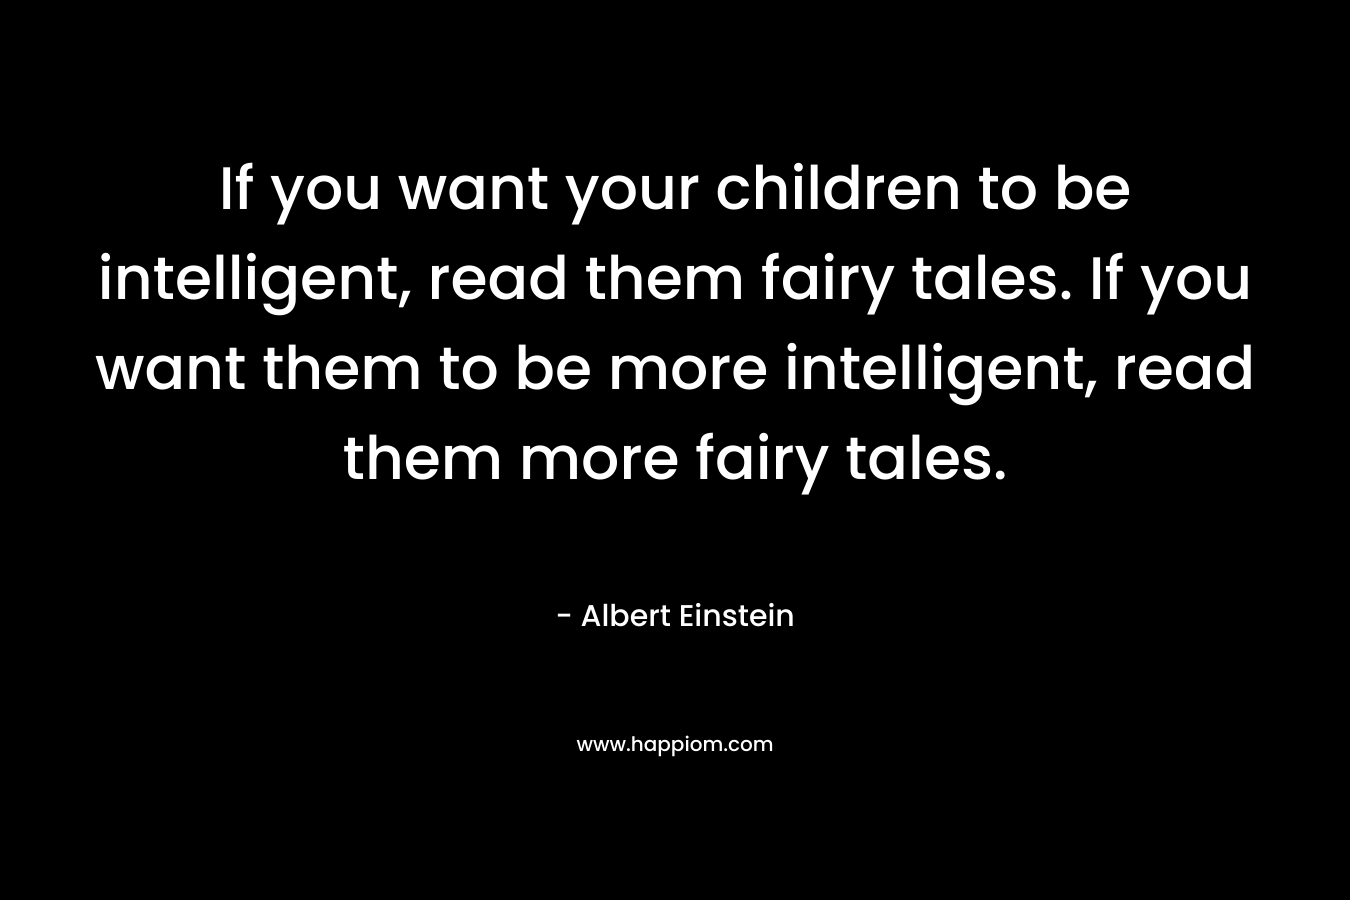 If you want your children to be intelligent, read them fairy tales. If you want them to be more intelligent, read them more fairy tales.